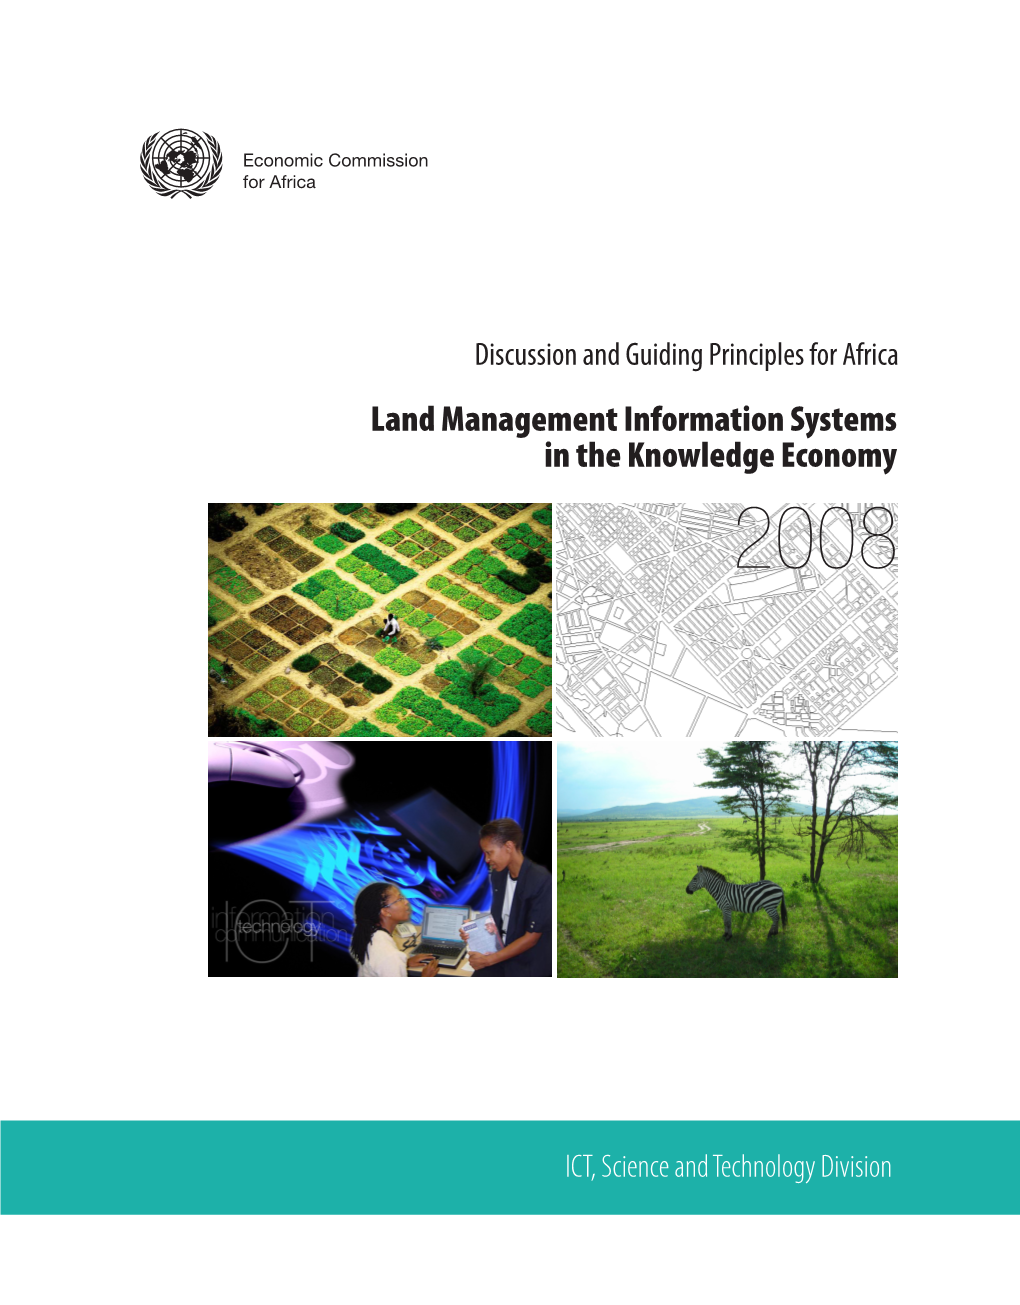 Land Management Information Systems in the Knowledge Economy 2008